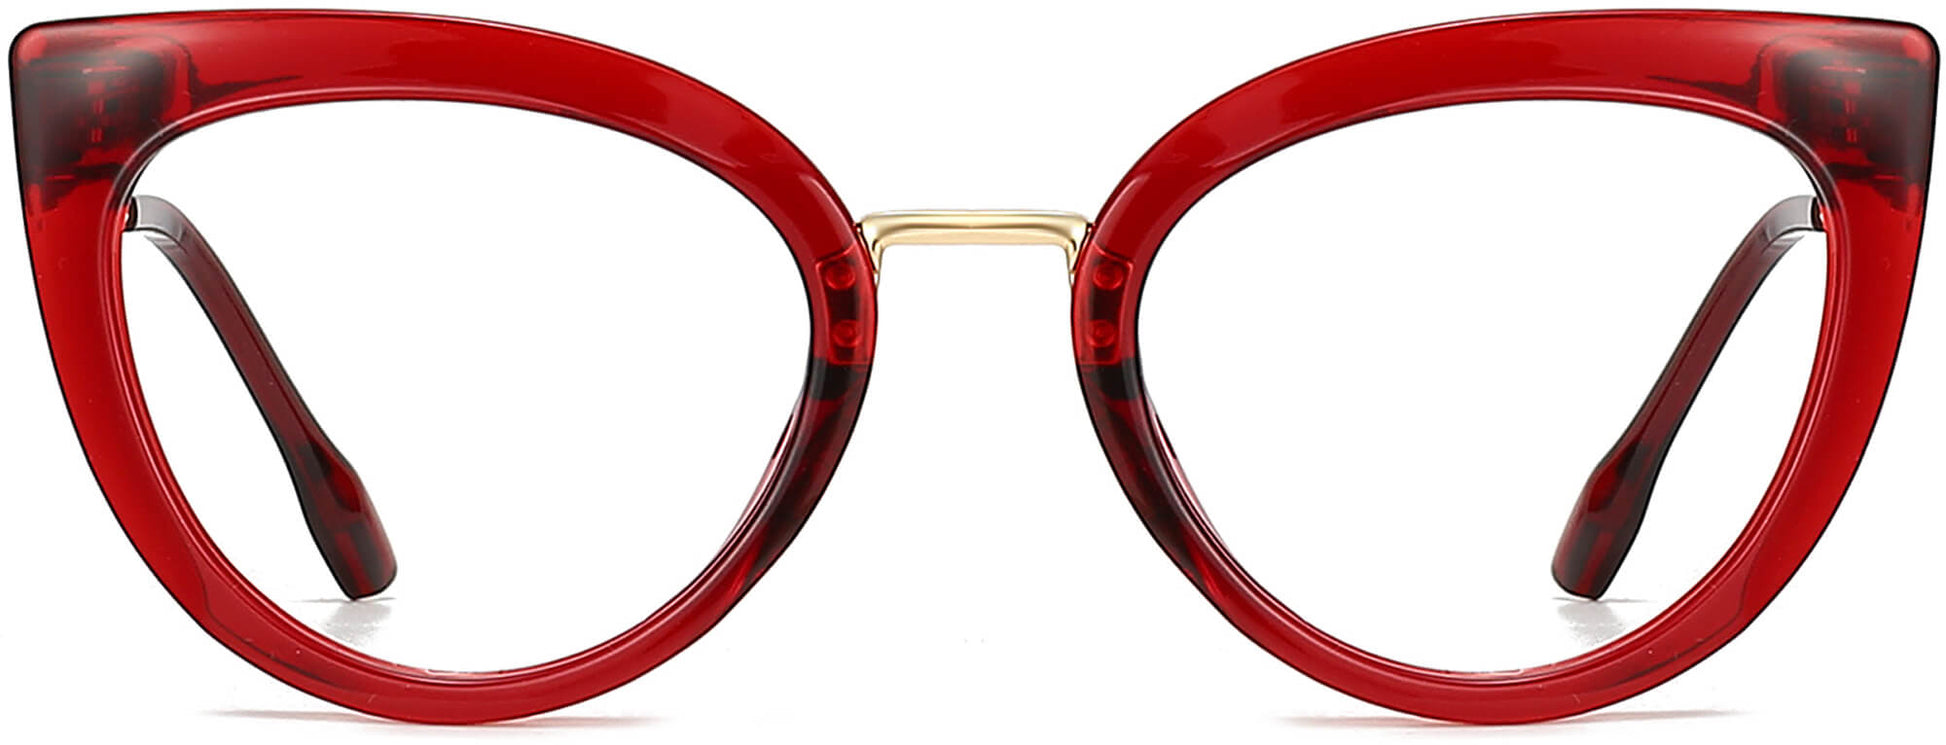 Matilda Cateye Red Eyeglasses from ANRRI, front view